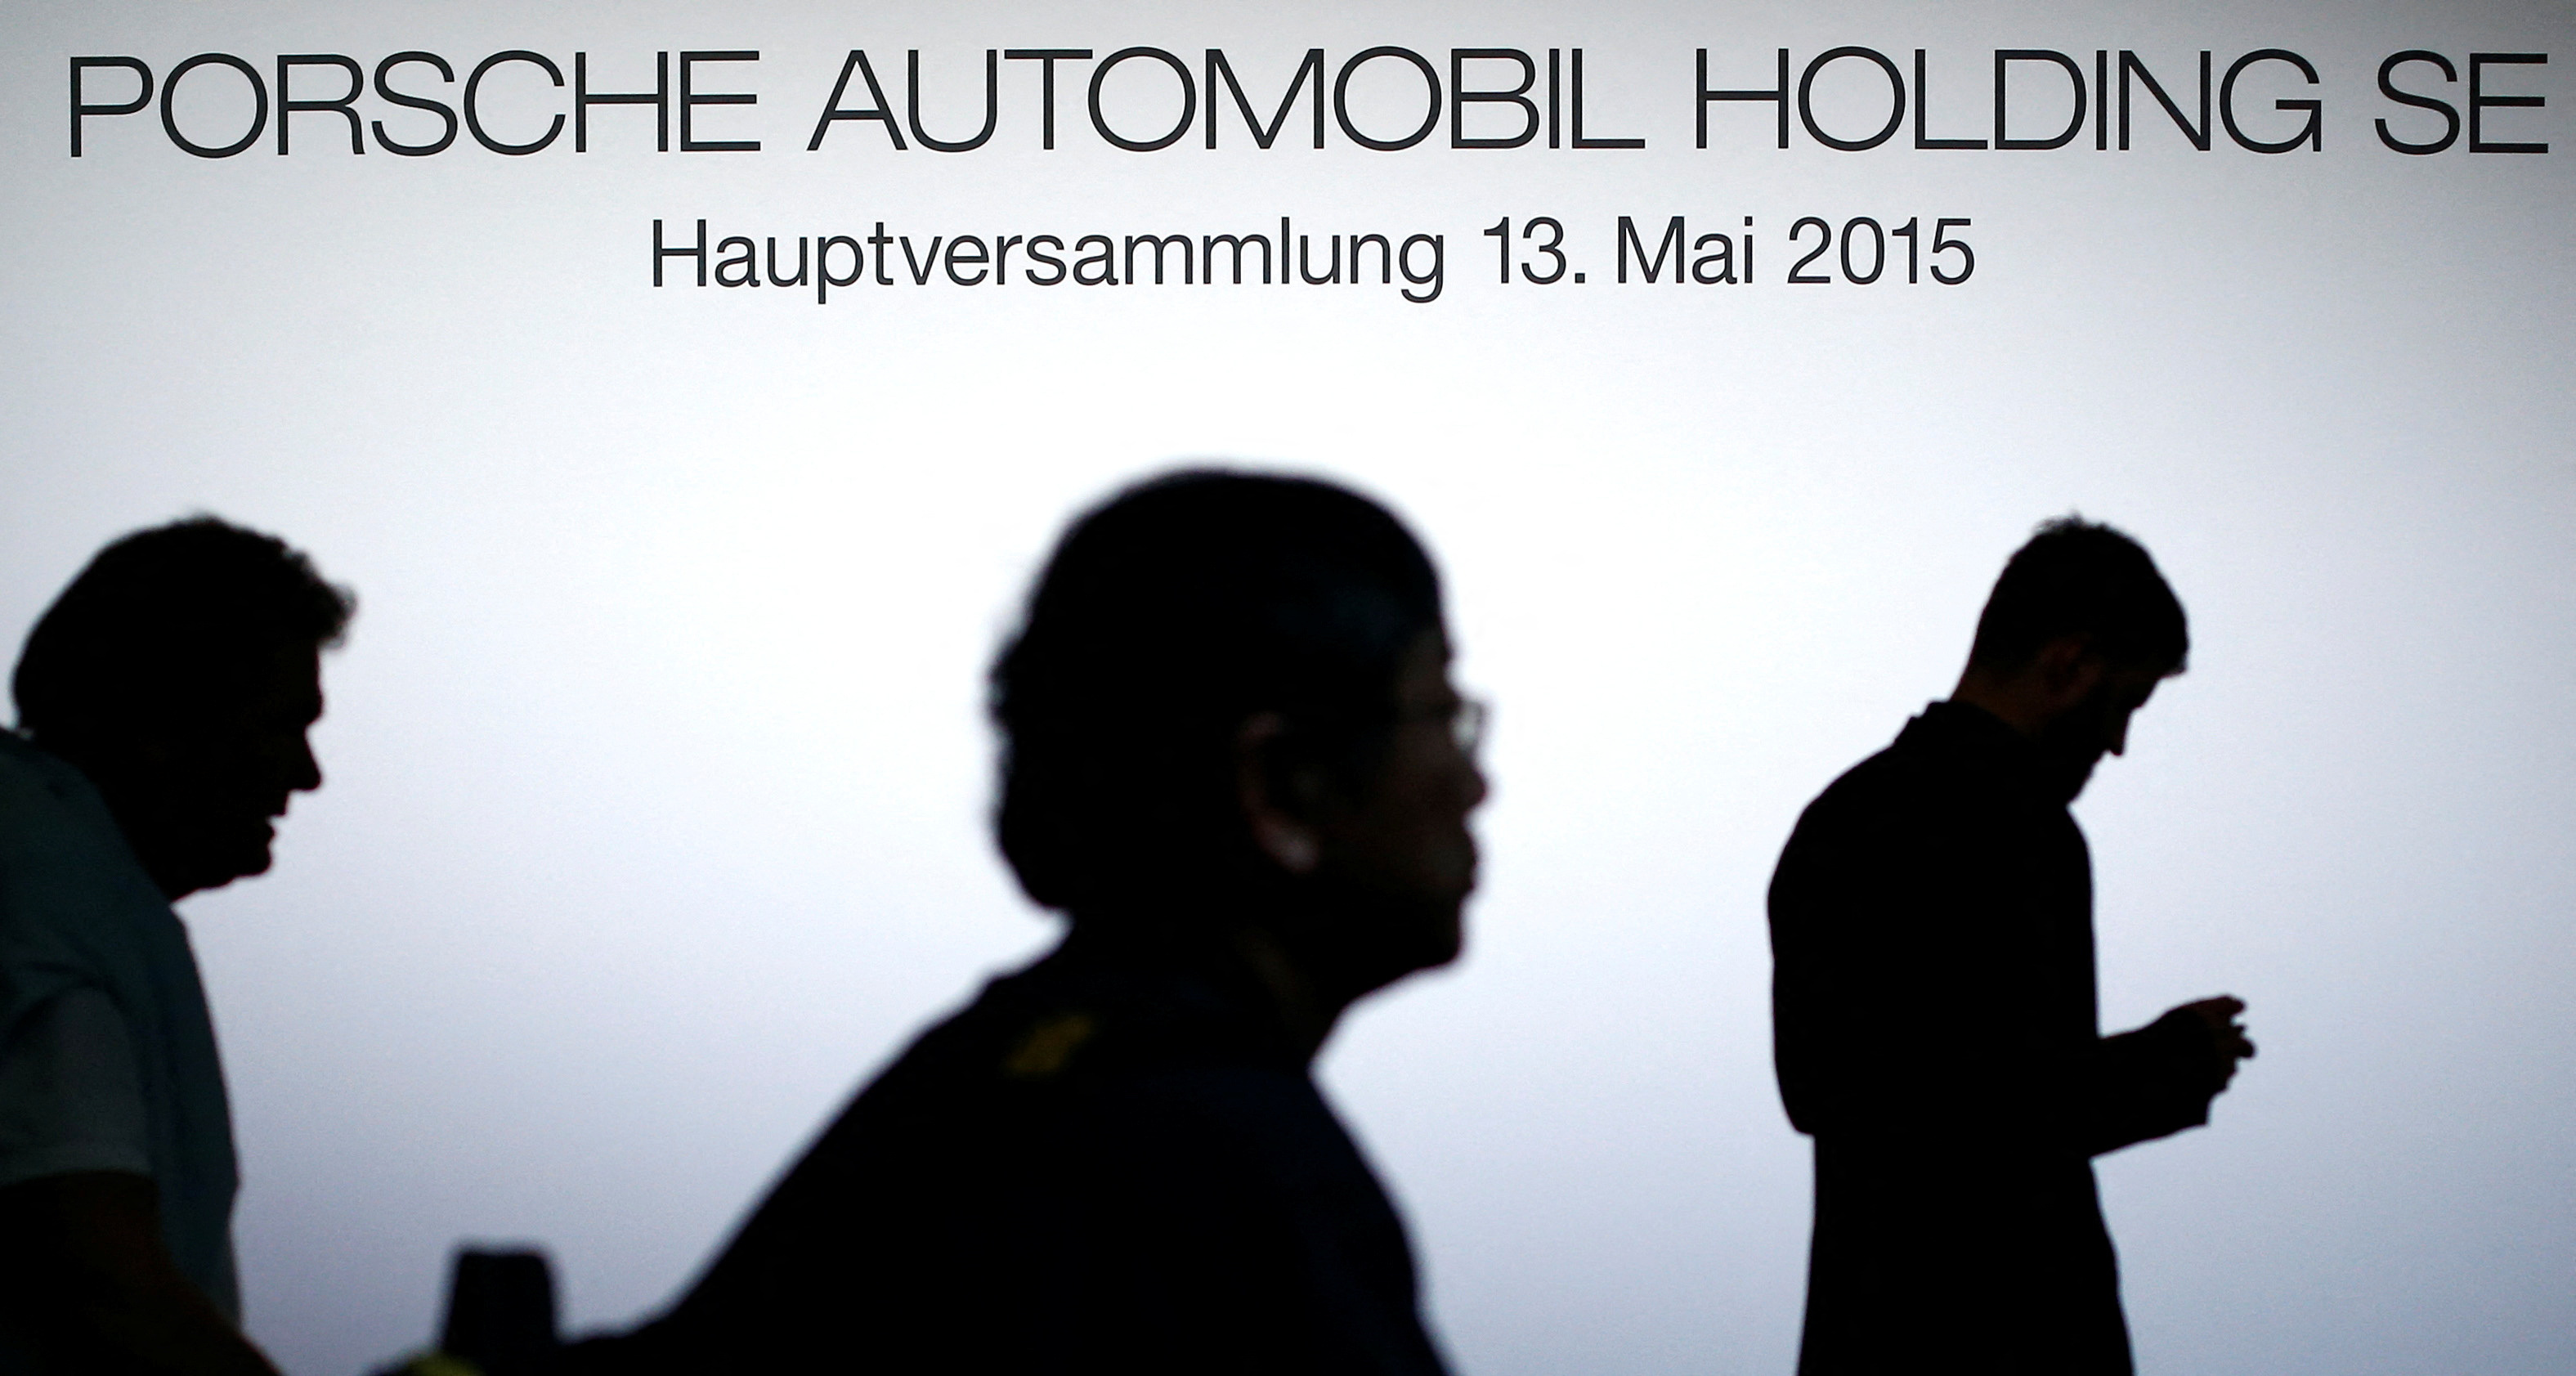 People are silhouetted at the Porsche annual meeting in Stuttgard